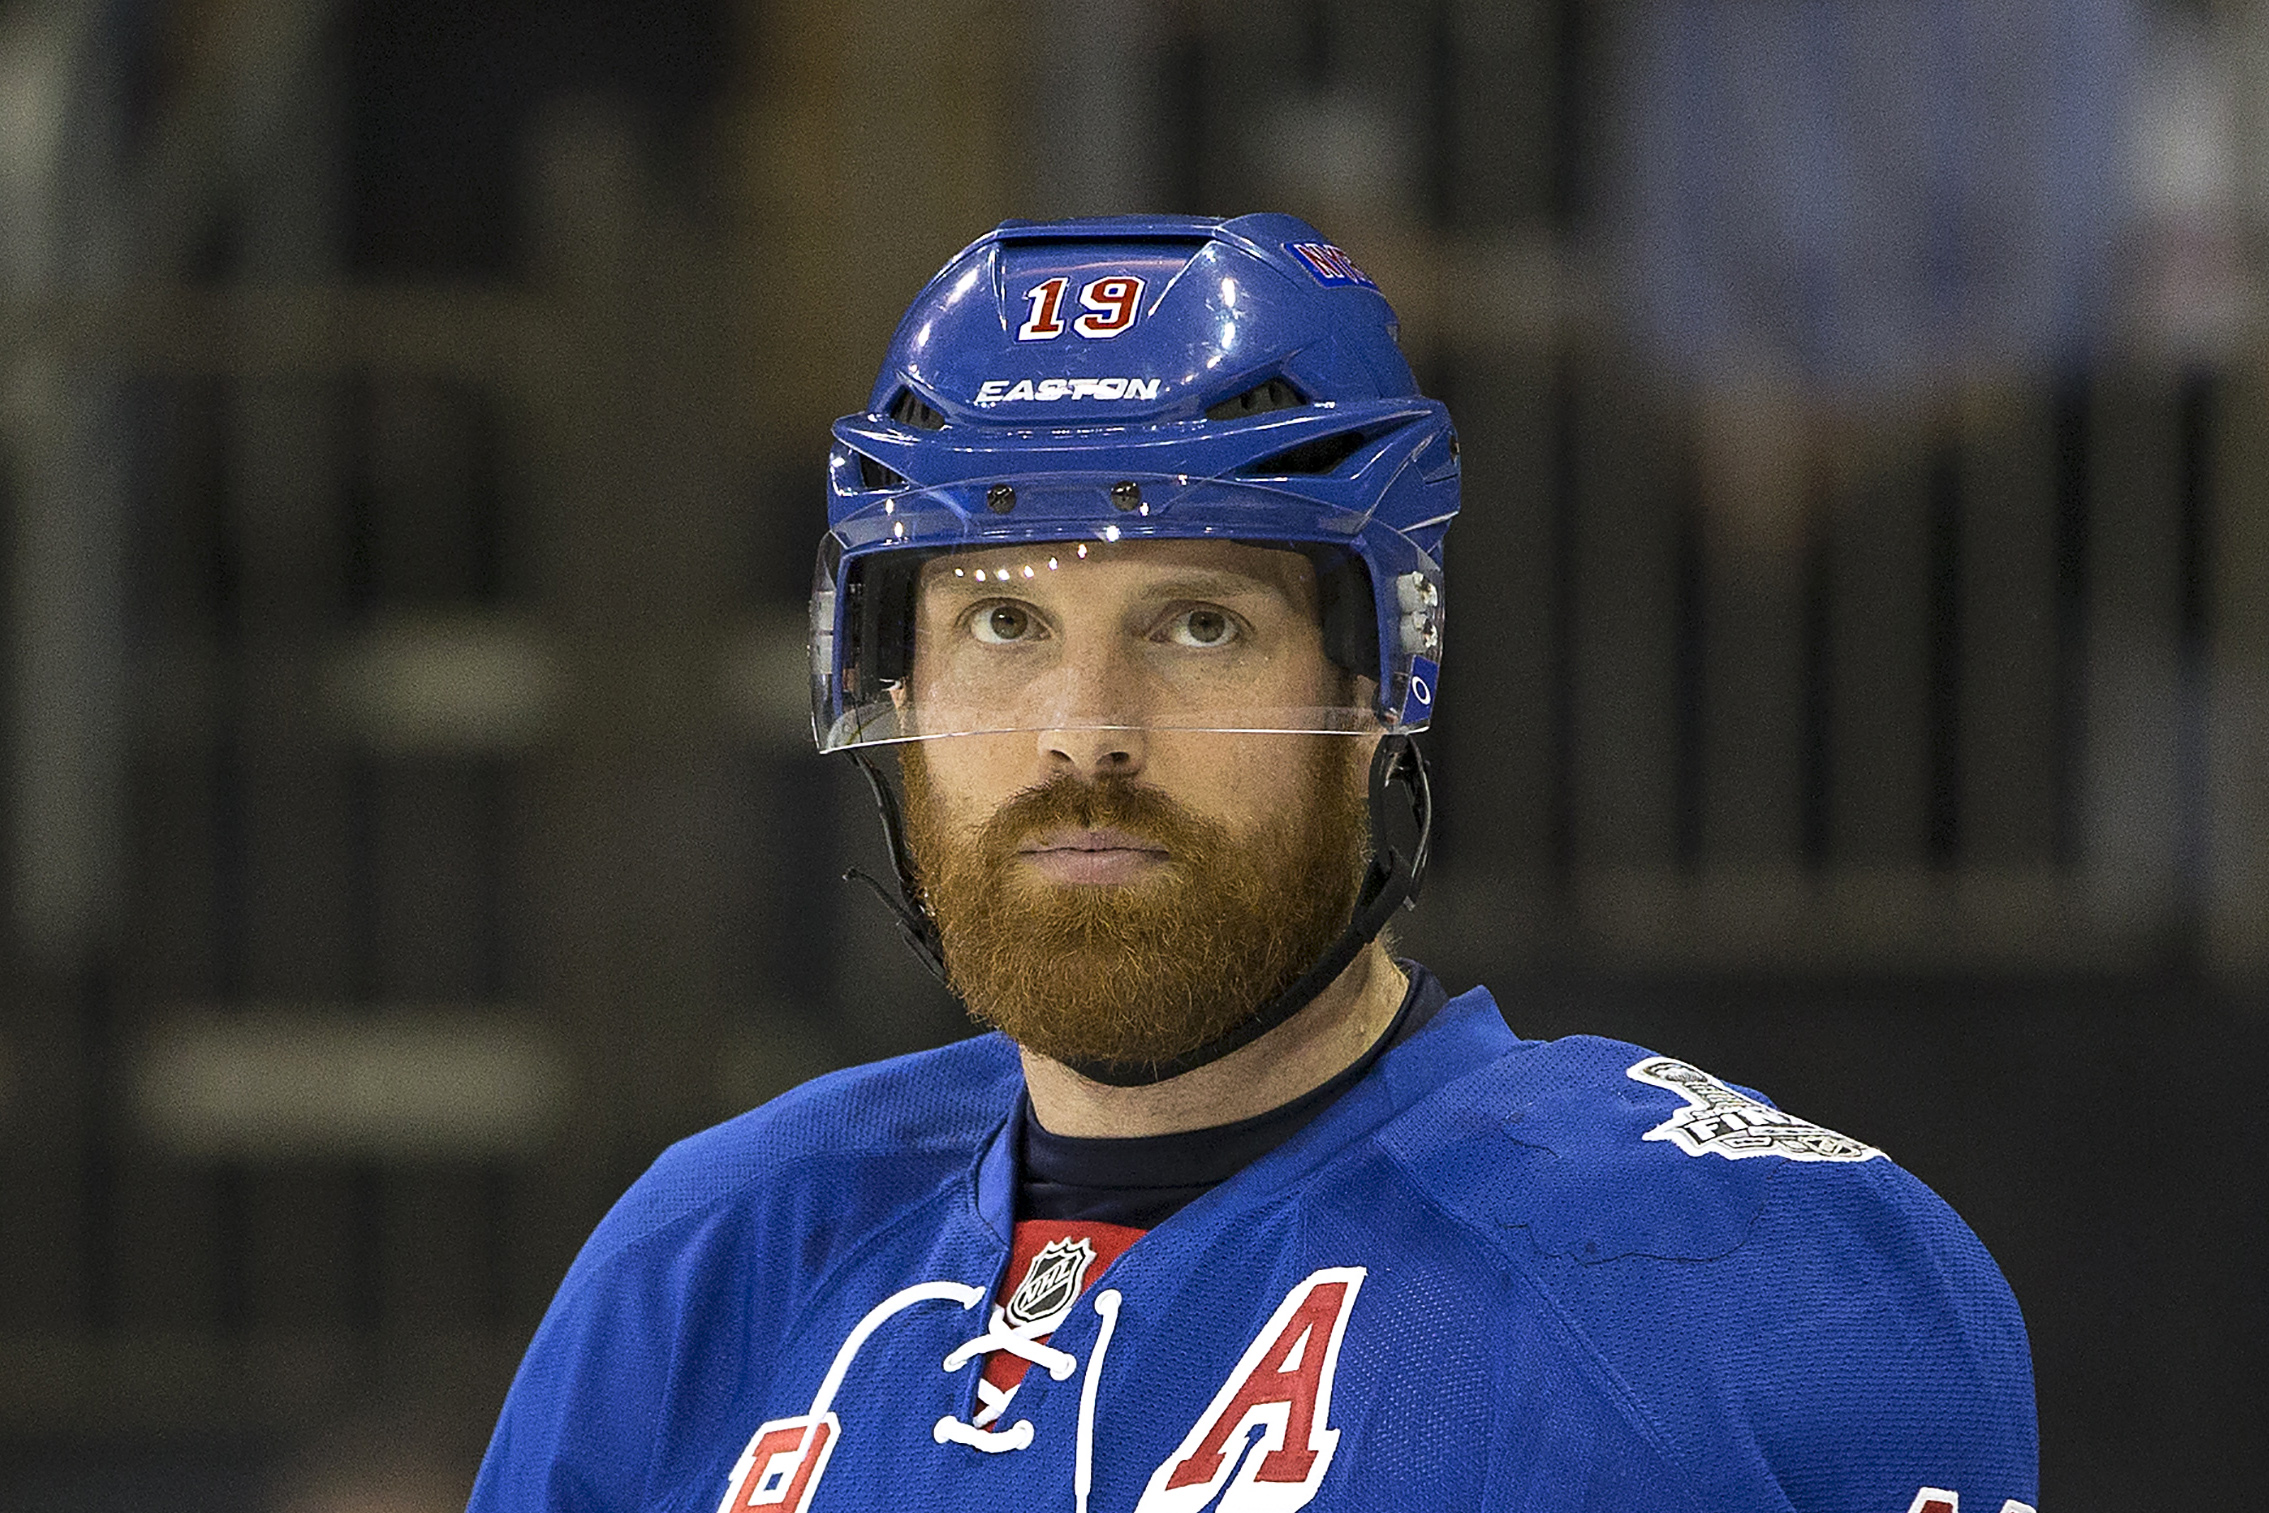 Rangers scratch Brad Richards from Game 4